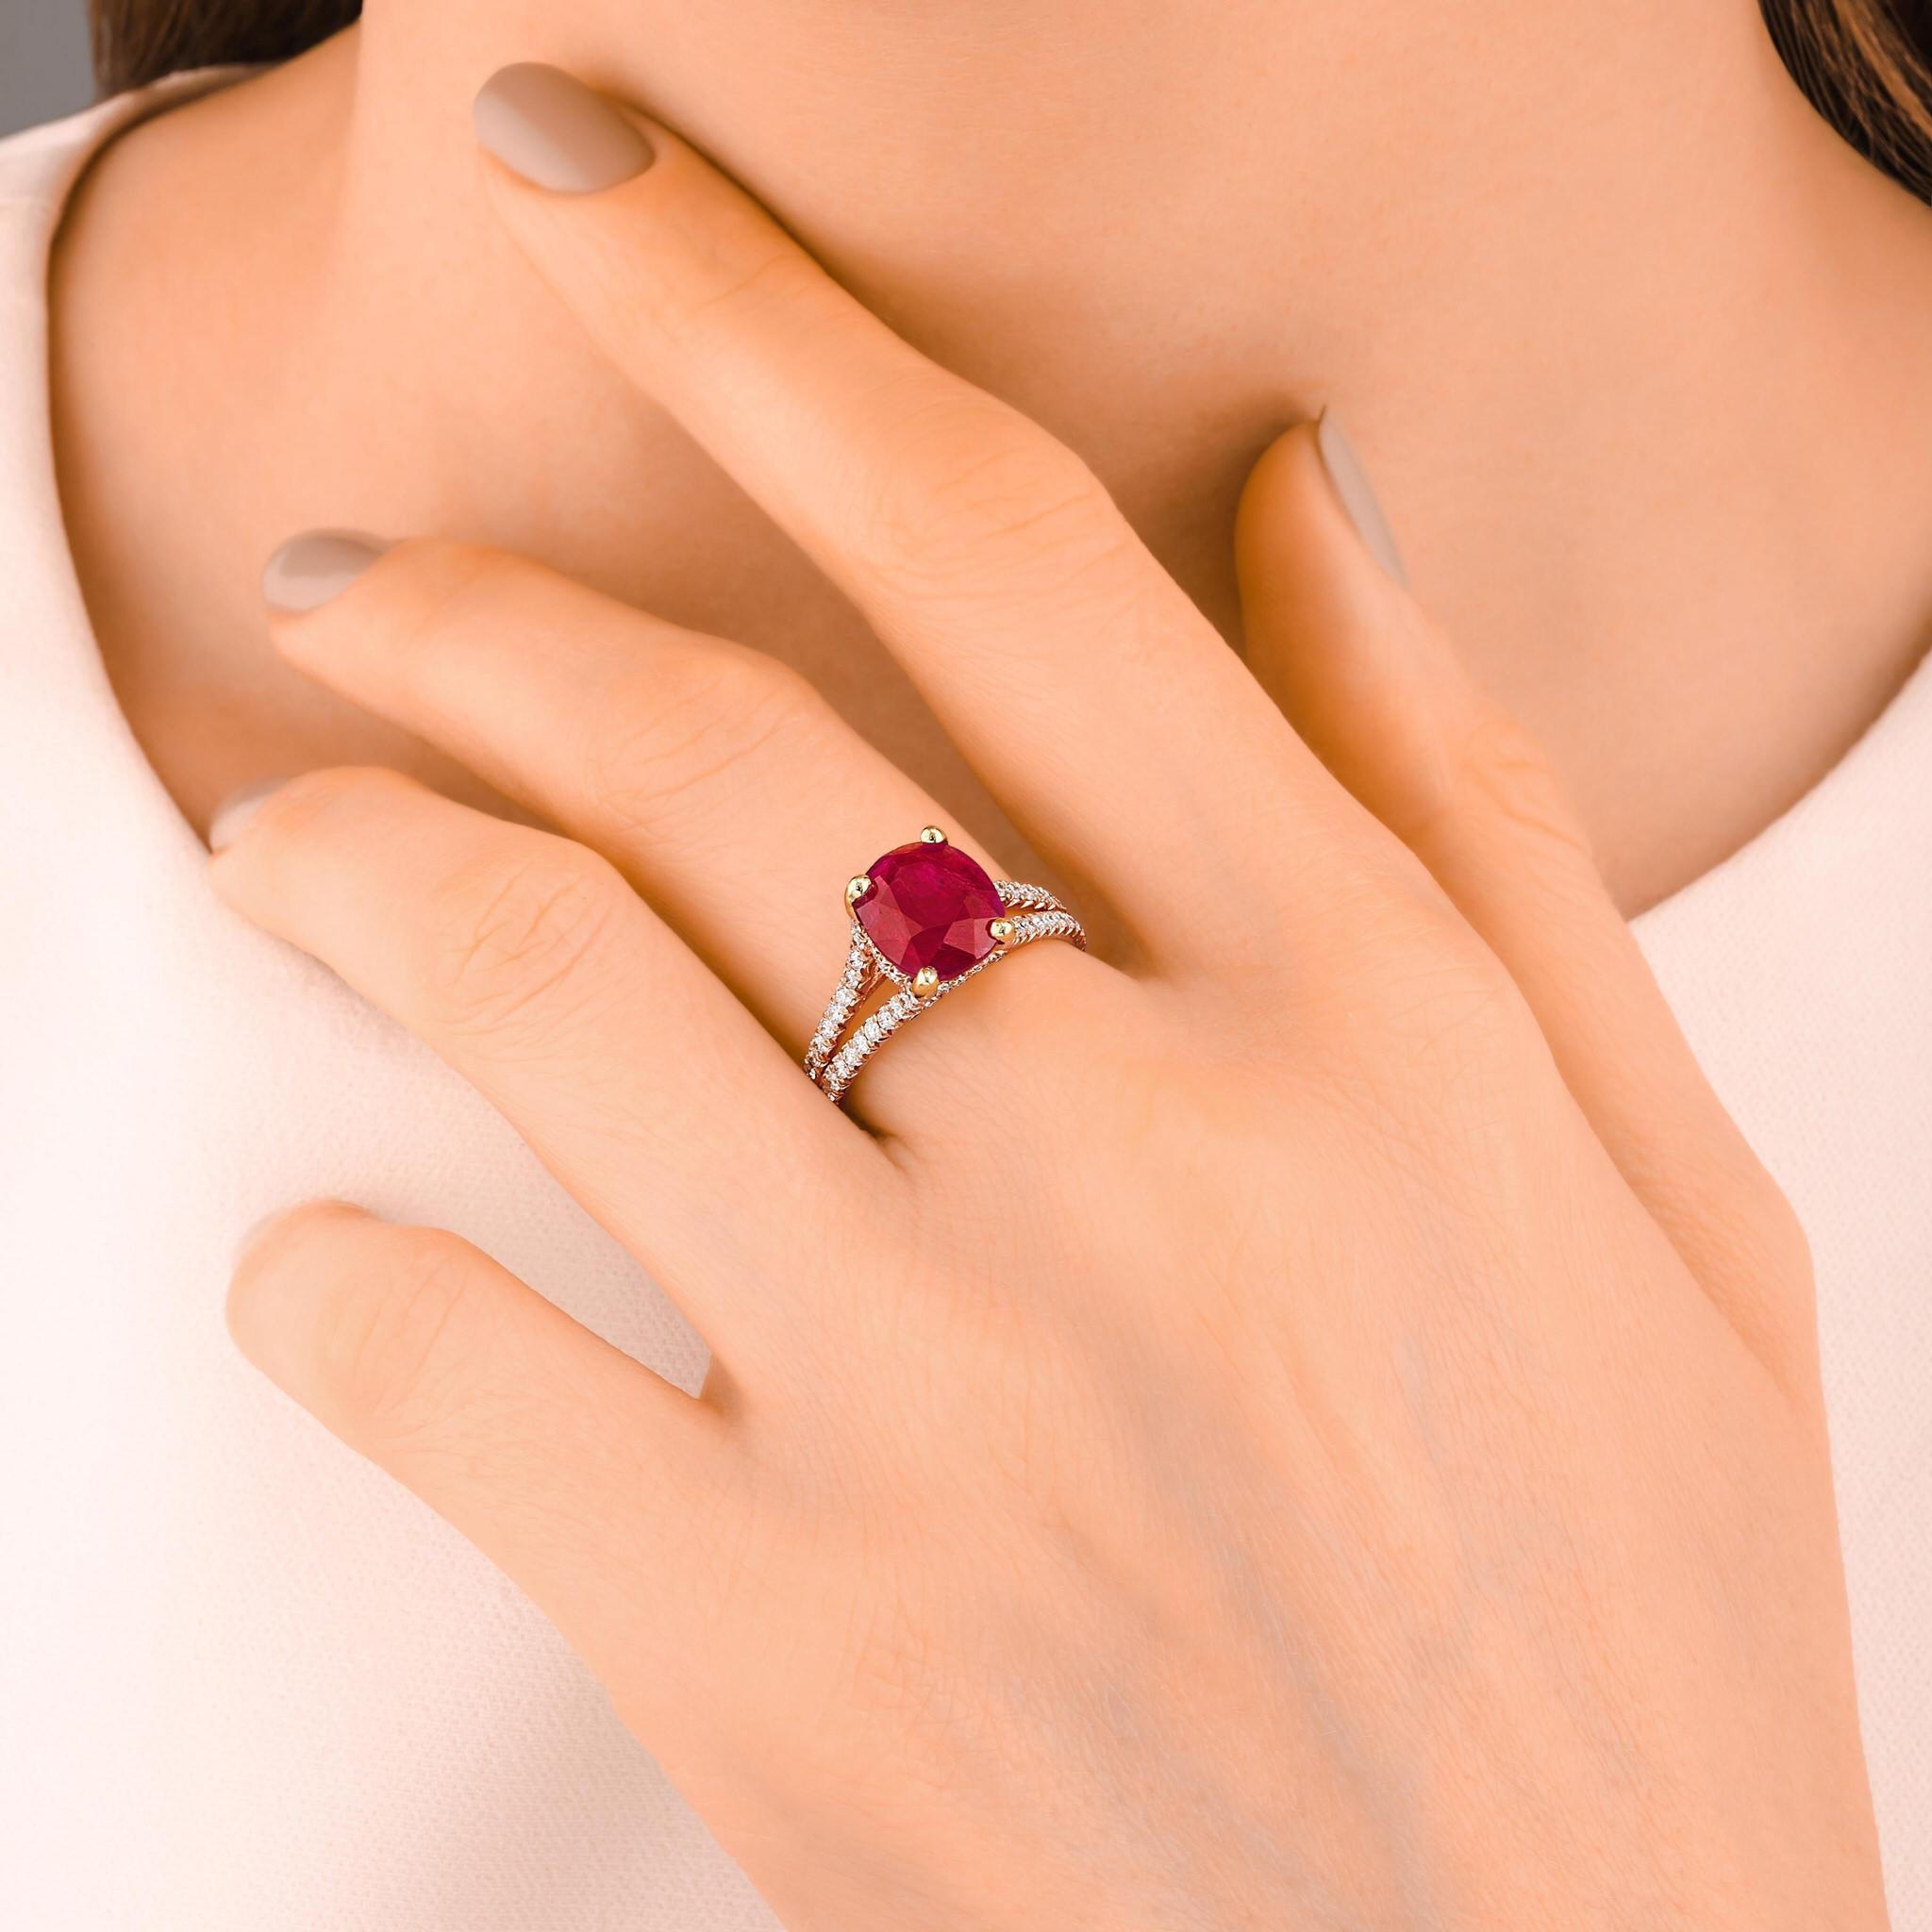 Contemporary Important Rare GIA Certified 3.68 Carat Natural Burma Unheated Ruby Ring For Sale